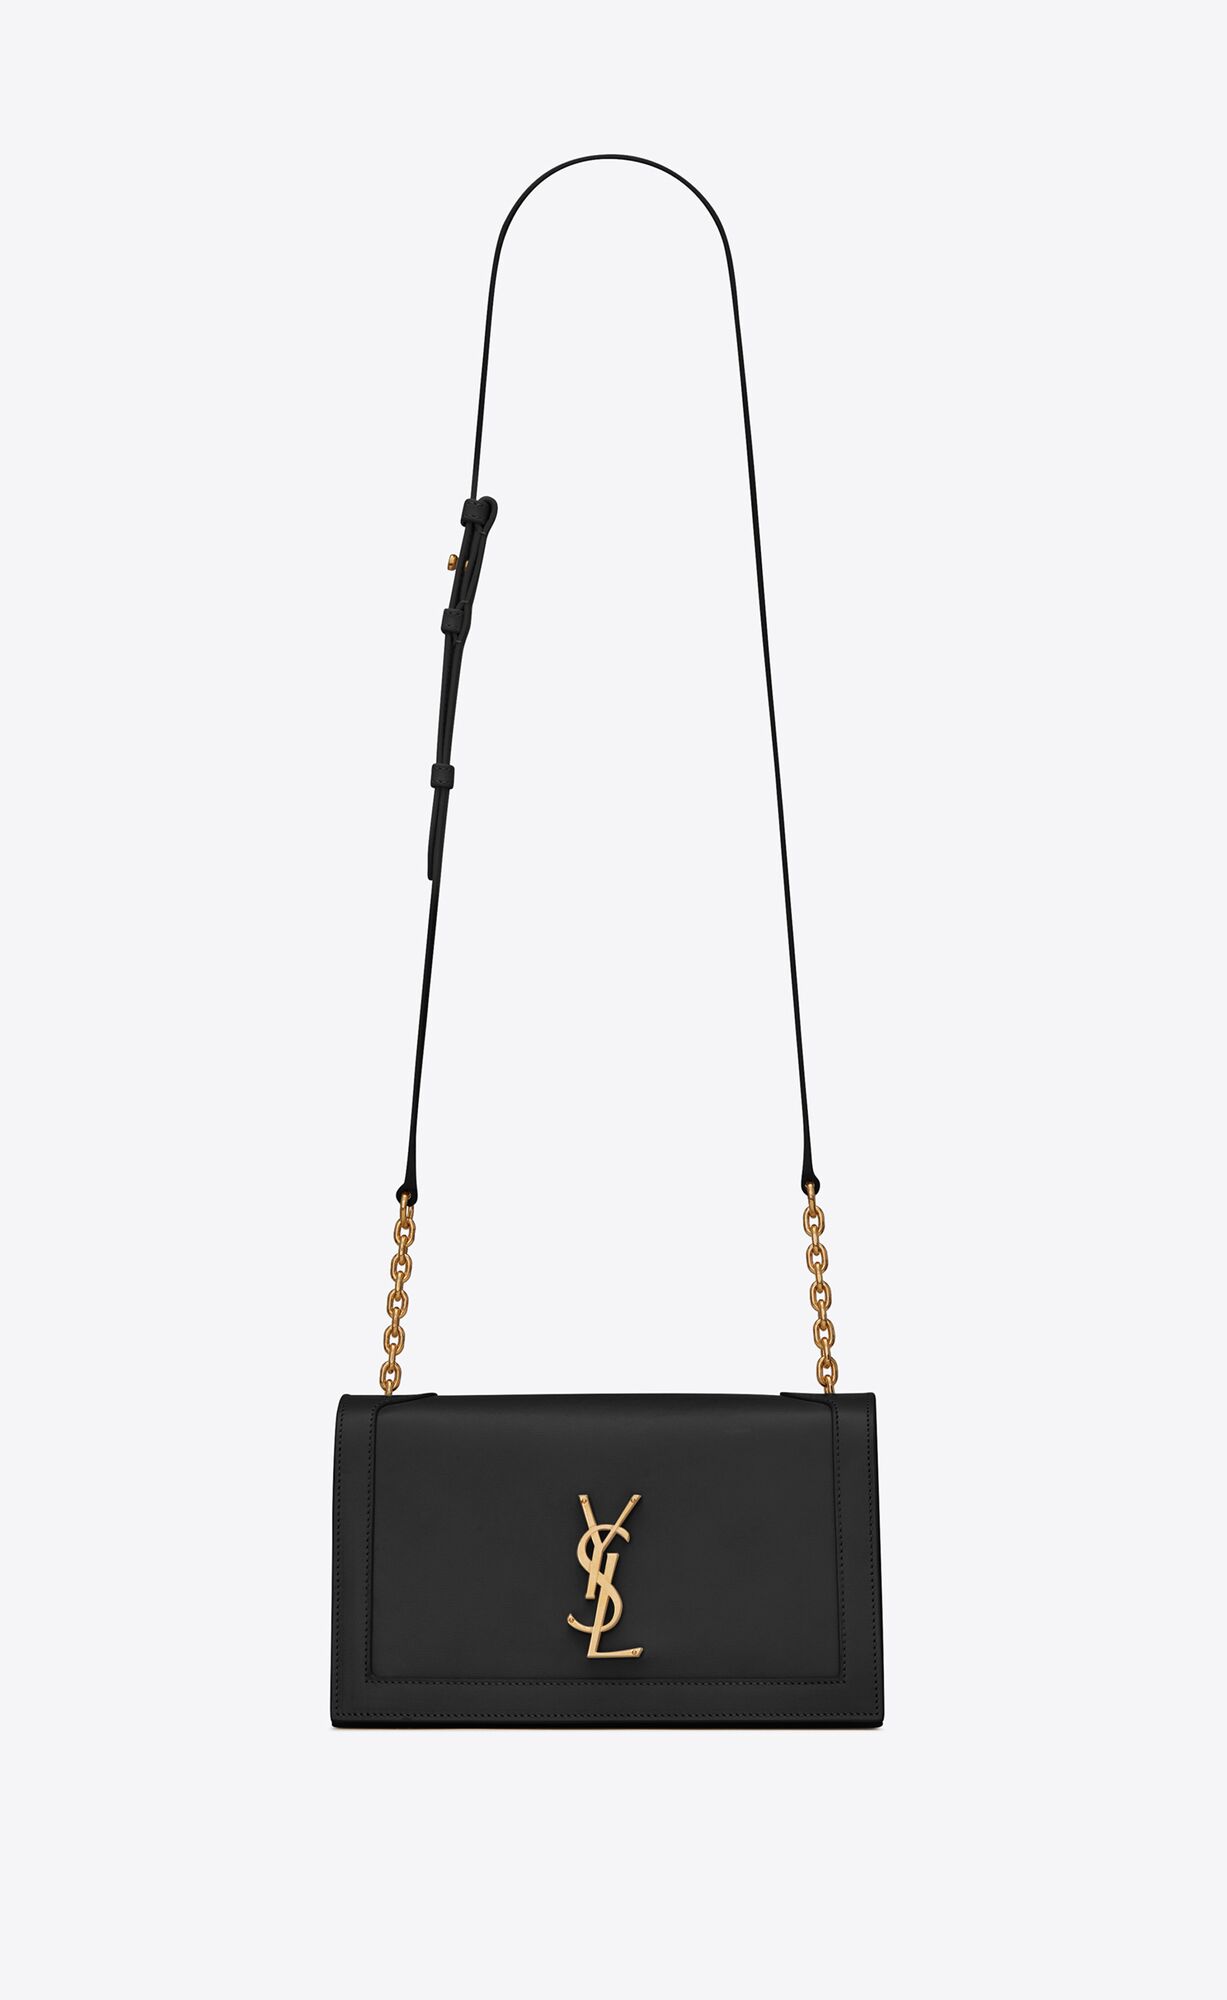 BOOK BAG in smooth leather | Saint Laurent United States | YSL.com